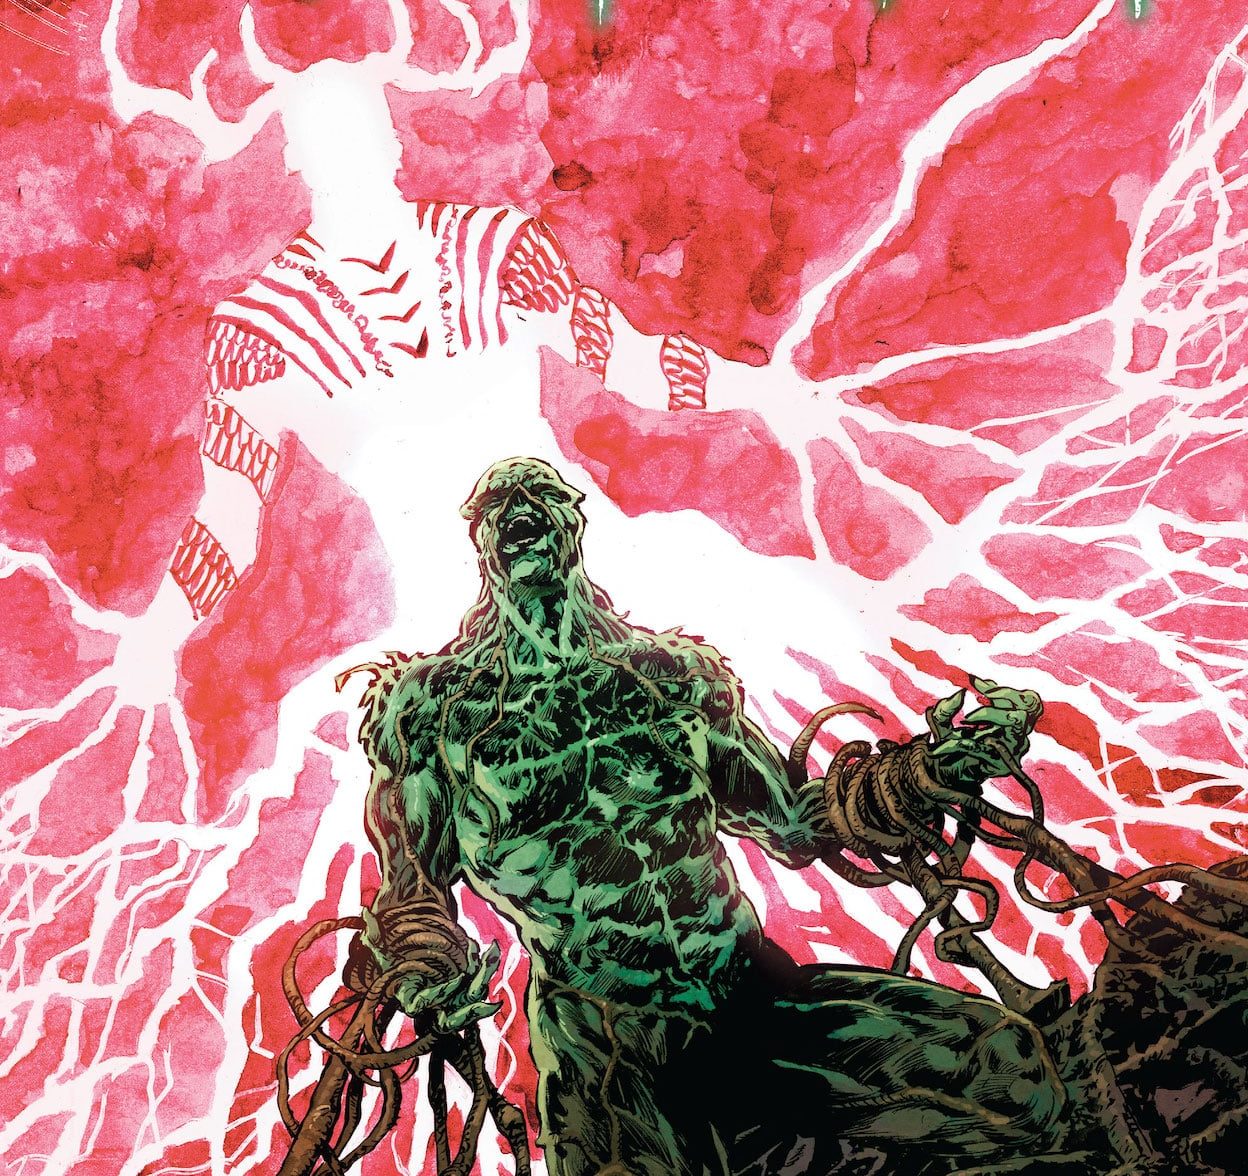 The Swamp Thing #10